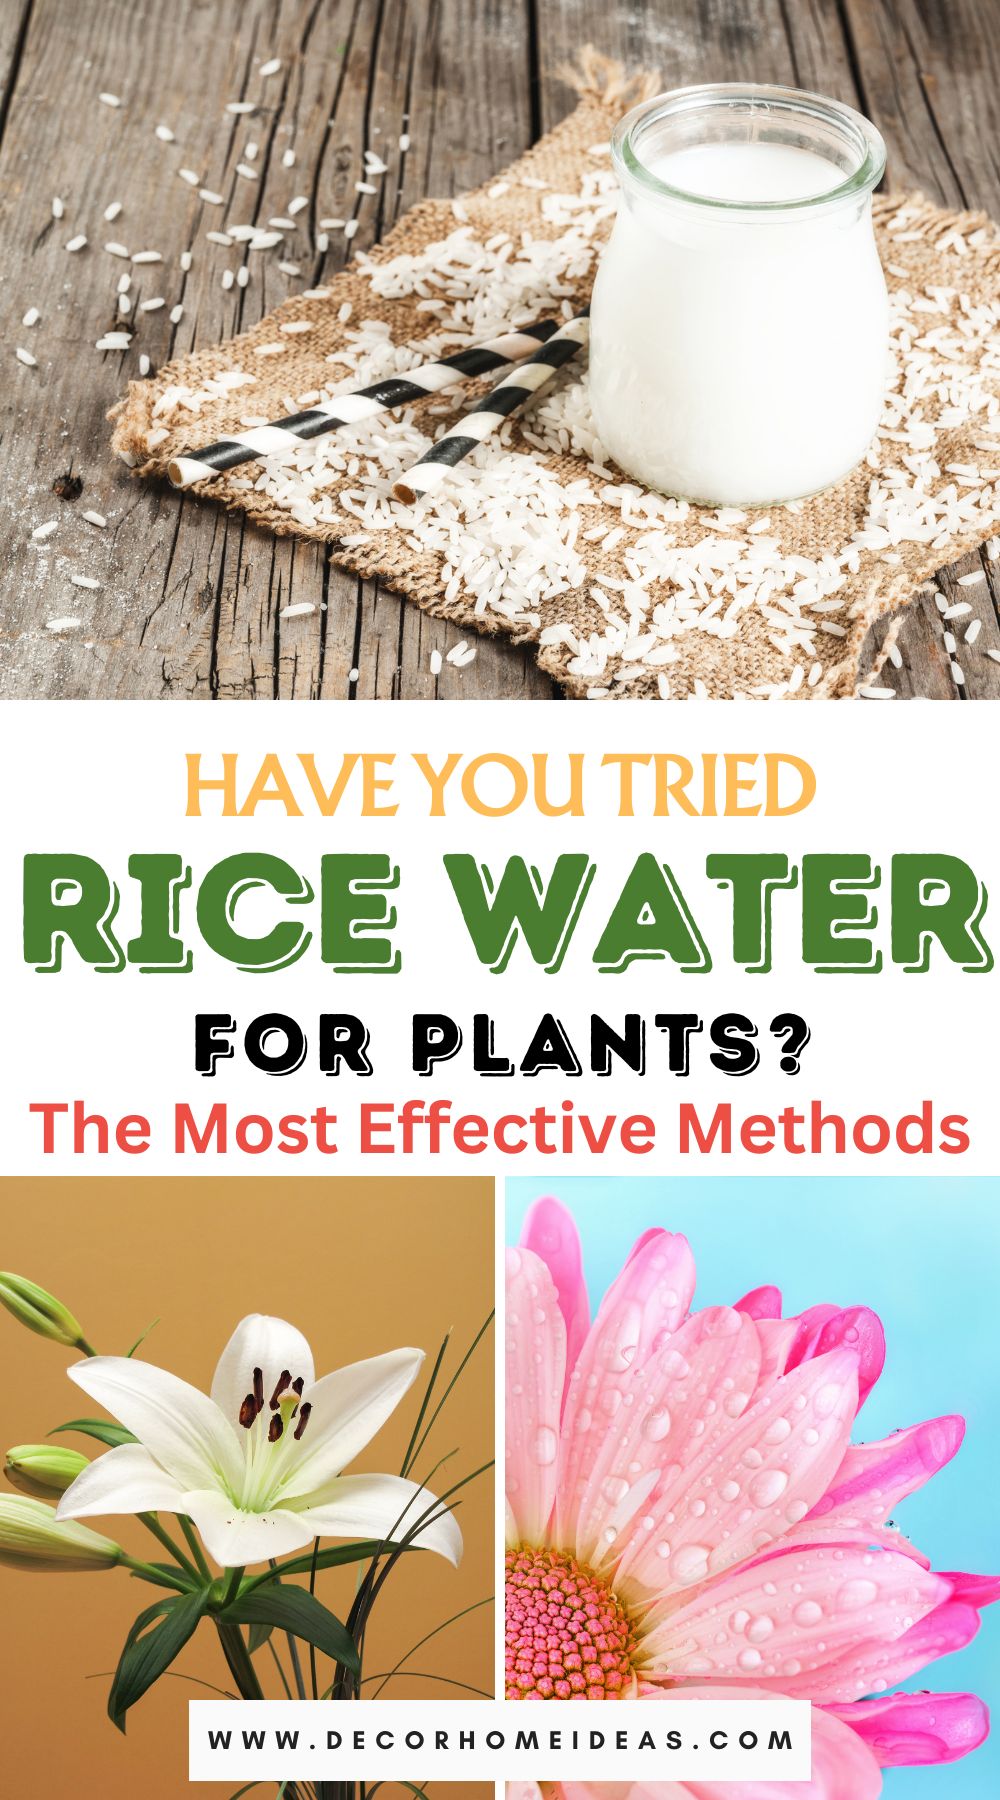 Unveil the secrets of using rice water for your plants! Explore the pros and cons, along with the most effective methods, in this comprehensive guide to nurturing your greenery with this age-old technique.